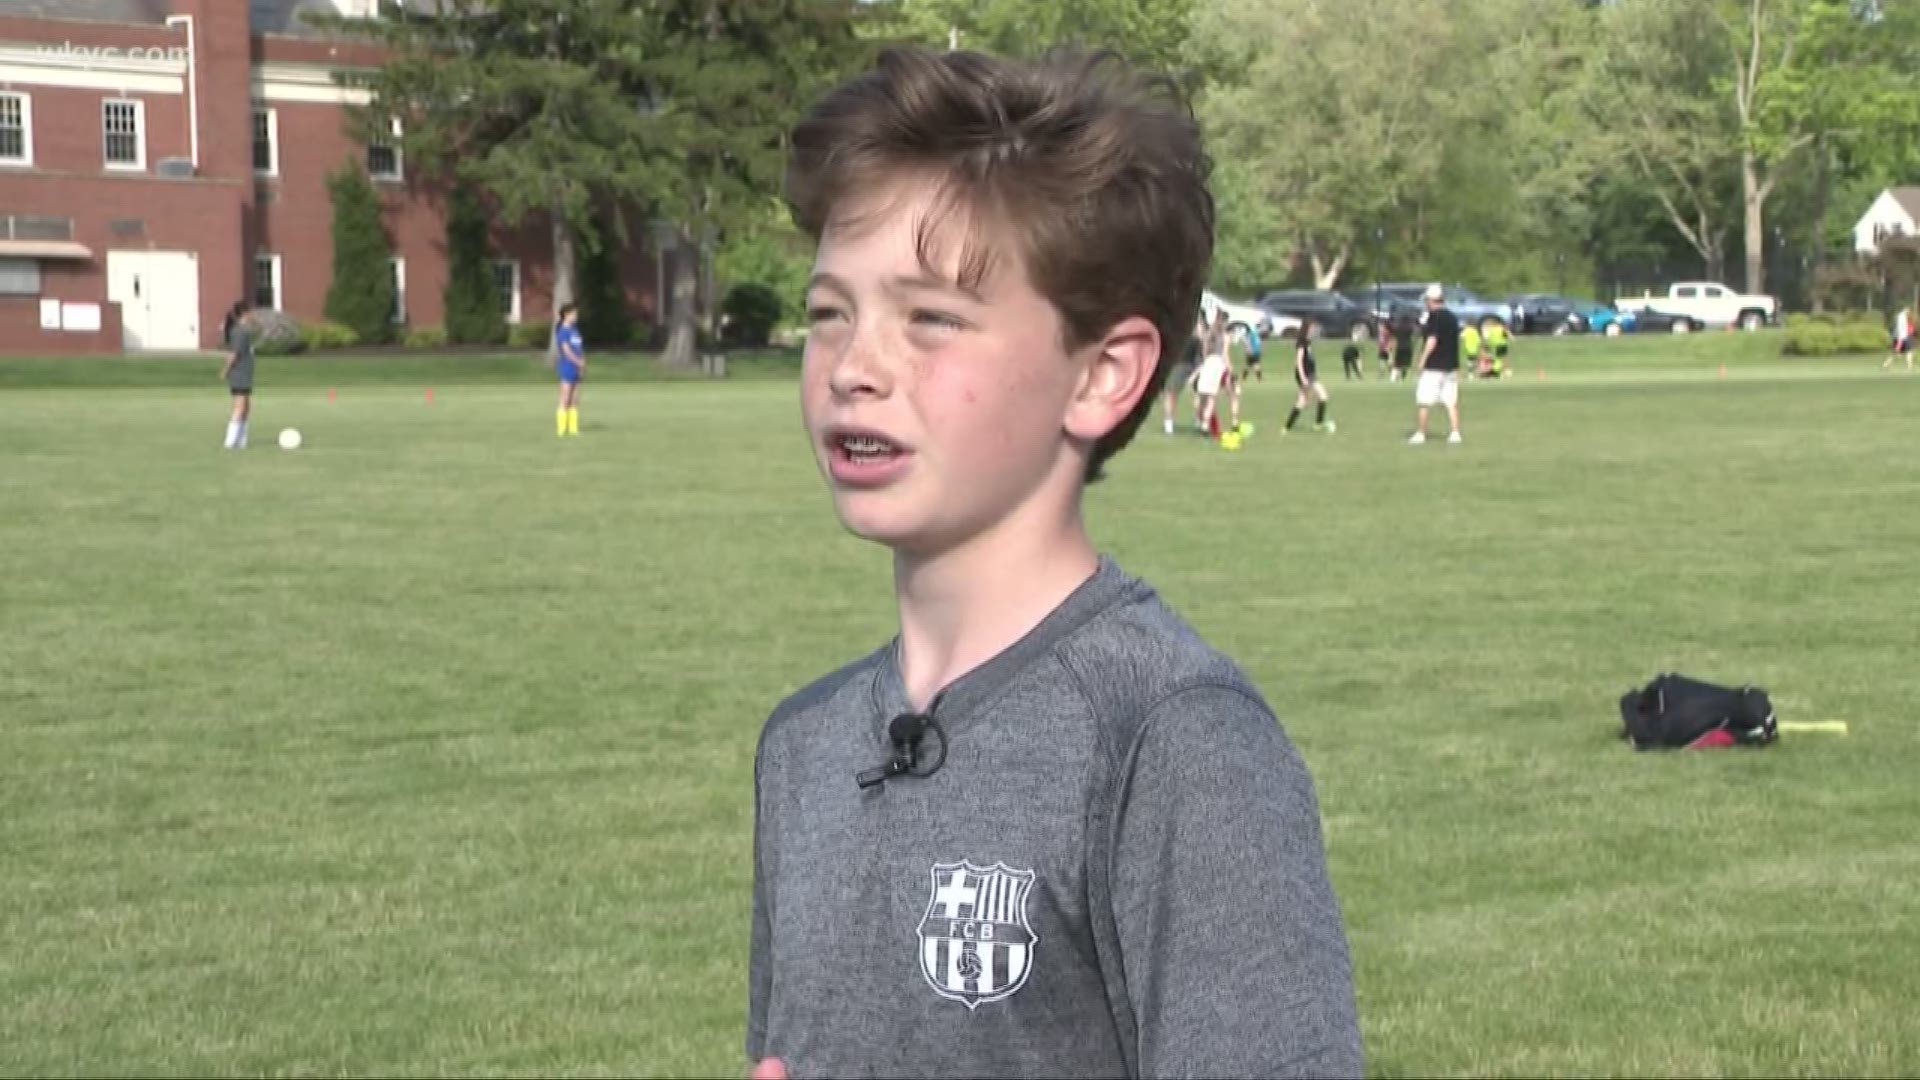 Shaker Heights boy uses Bar Mitzvah to raise more than $4,000 for new playground